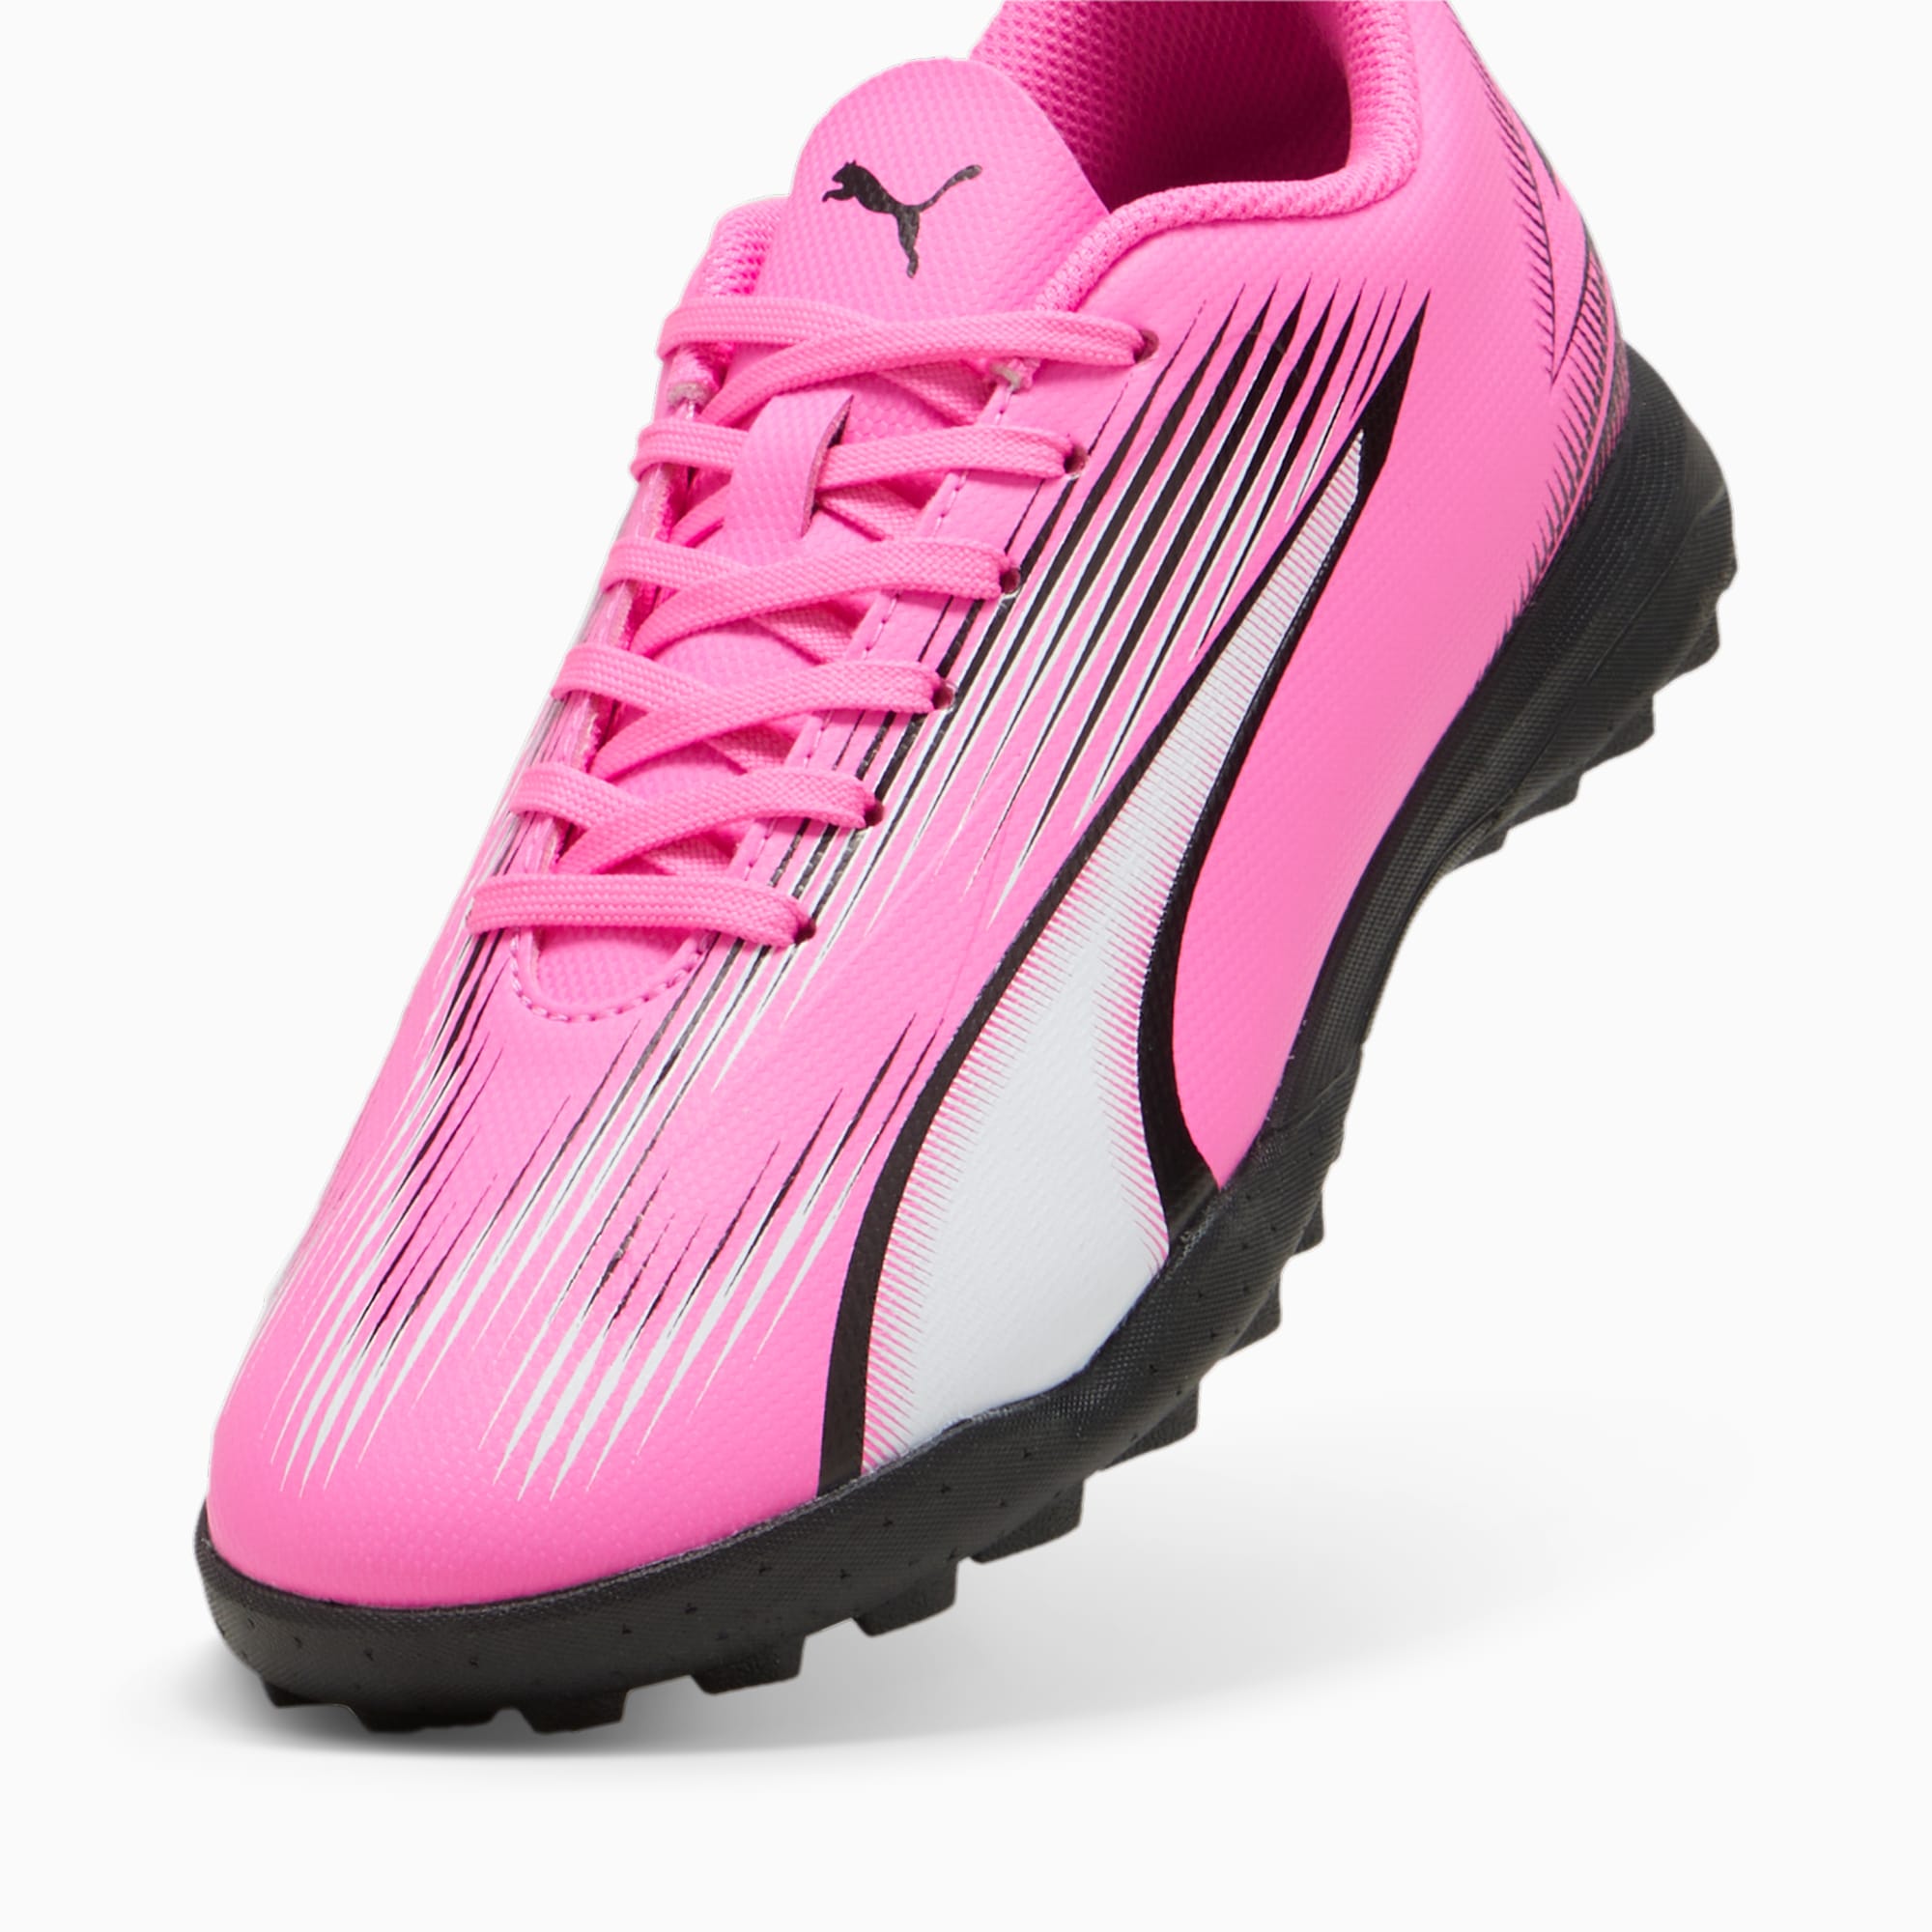 PUMA Ultra Play TT Youth Football Boots, Poison Pink/White/Black